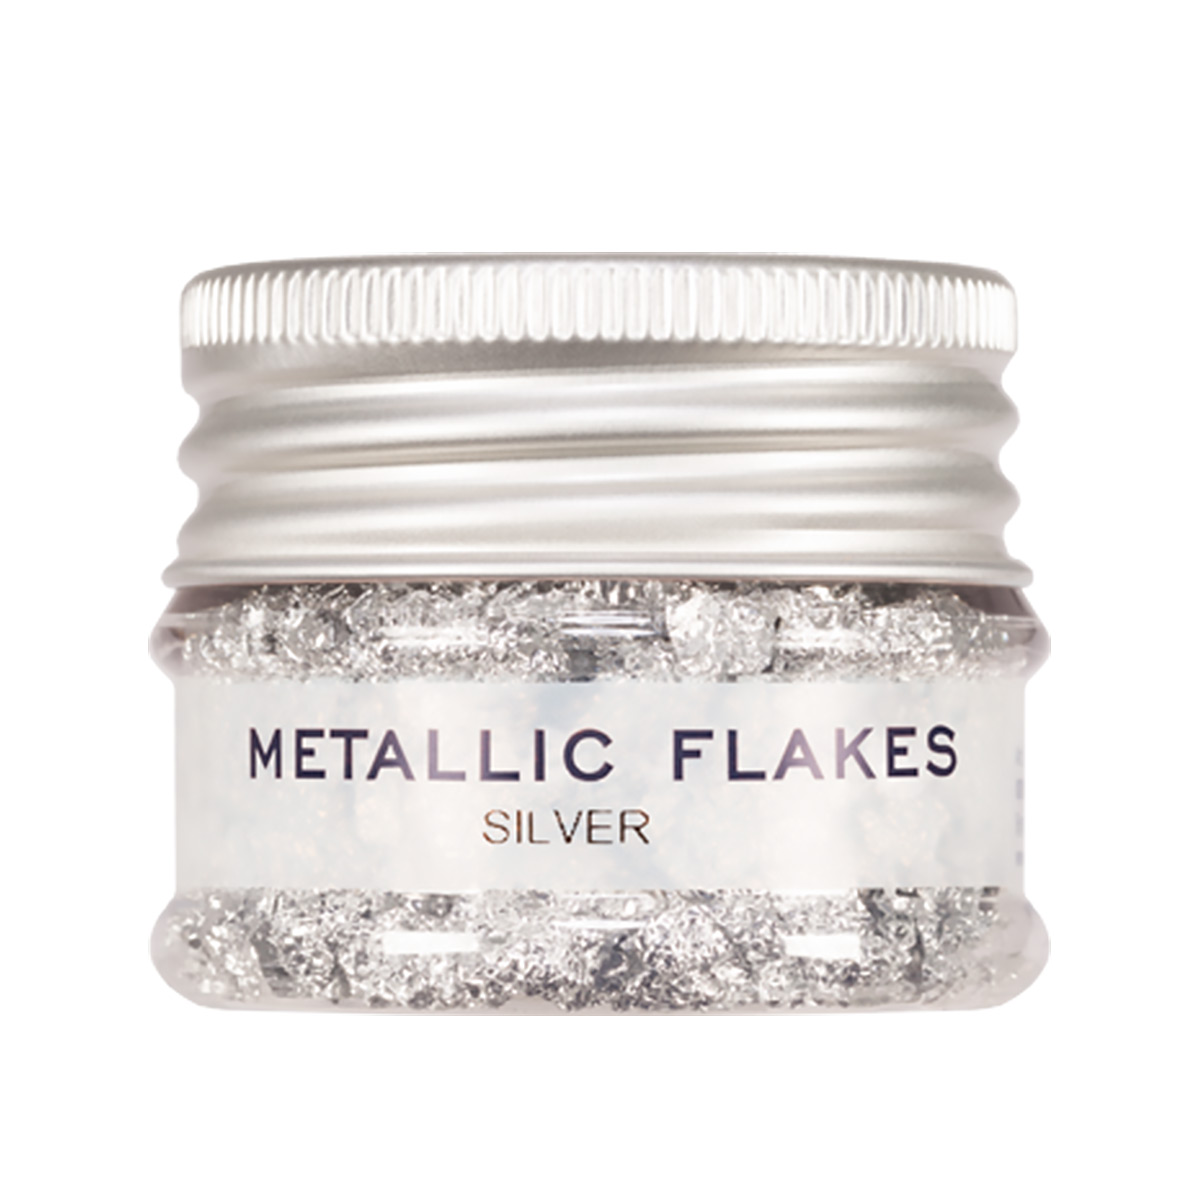 Metall flakes silver